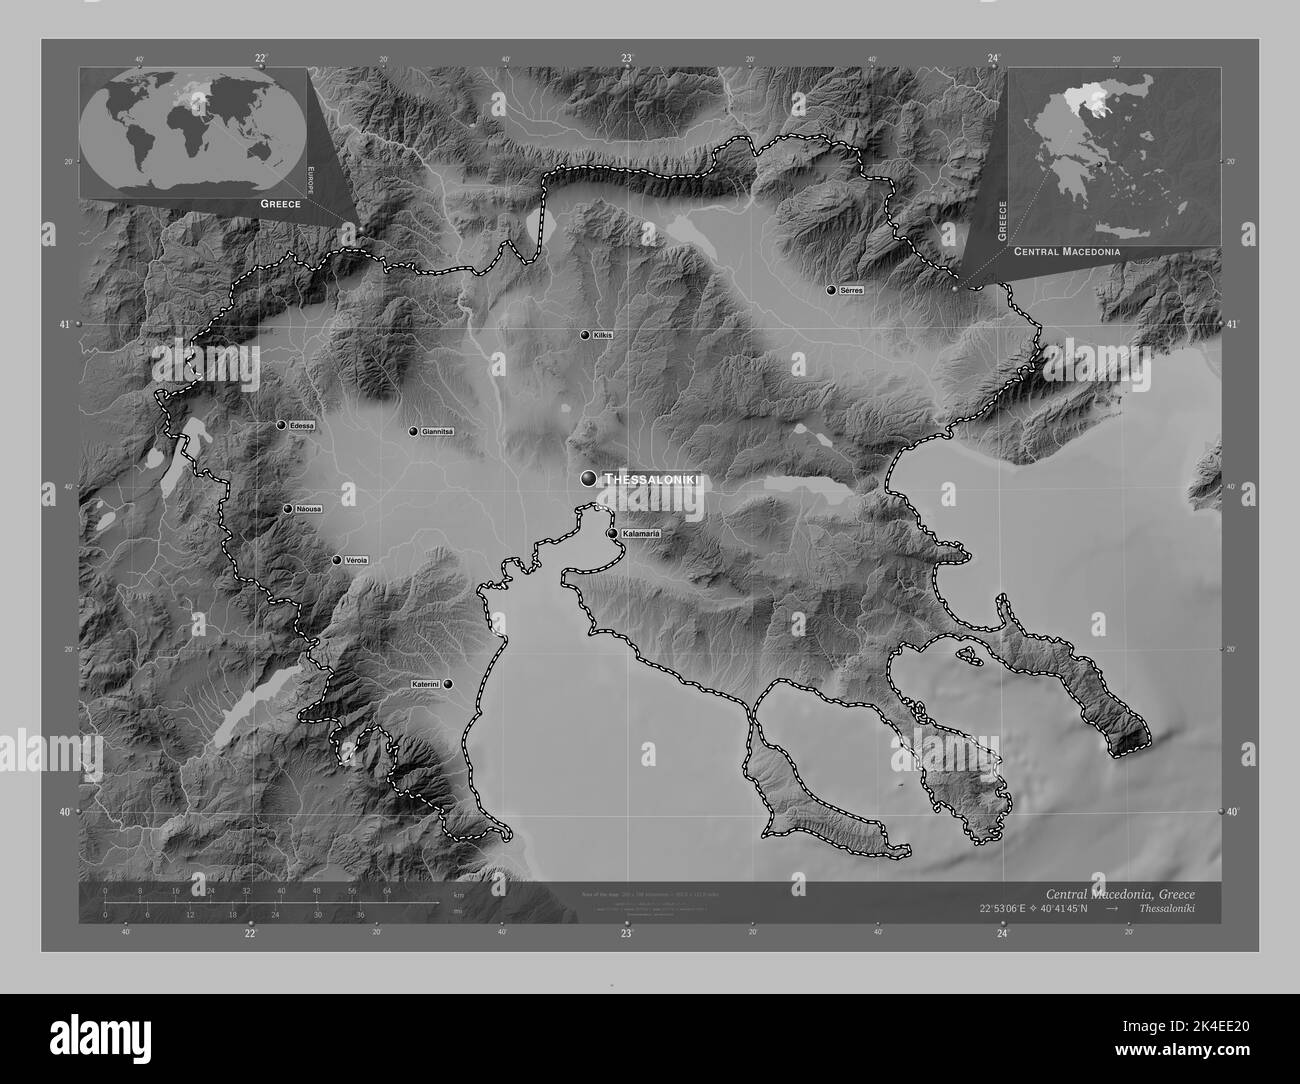 Central Macedonia, decentralized administration of Greece. Grayscale elevation map with lakes and rivers. Locations and names of major cities of the r Stock Photo